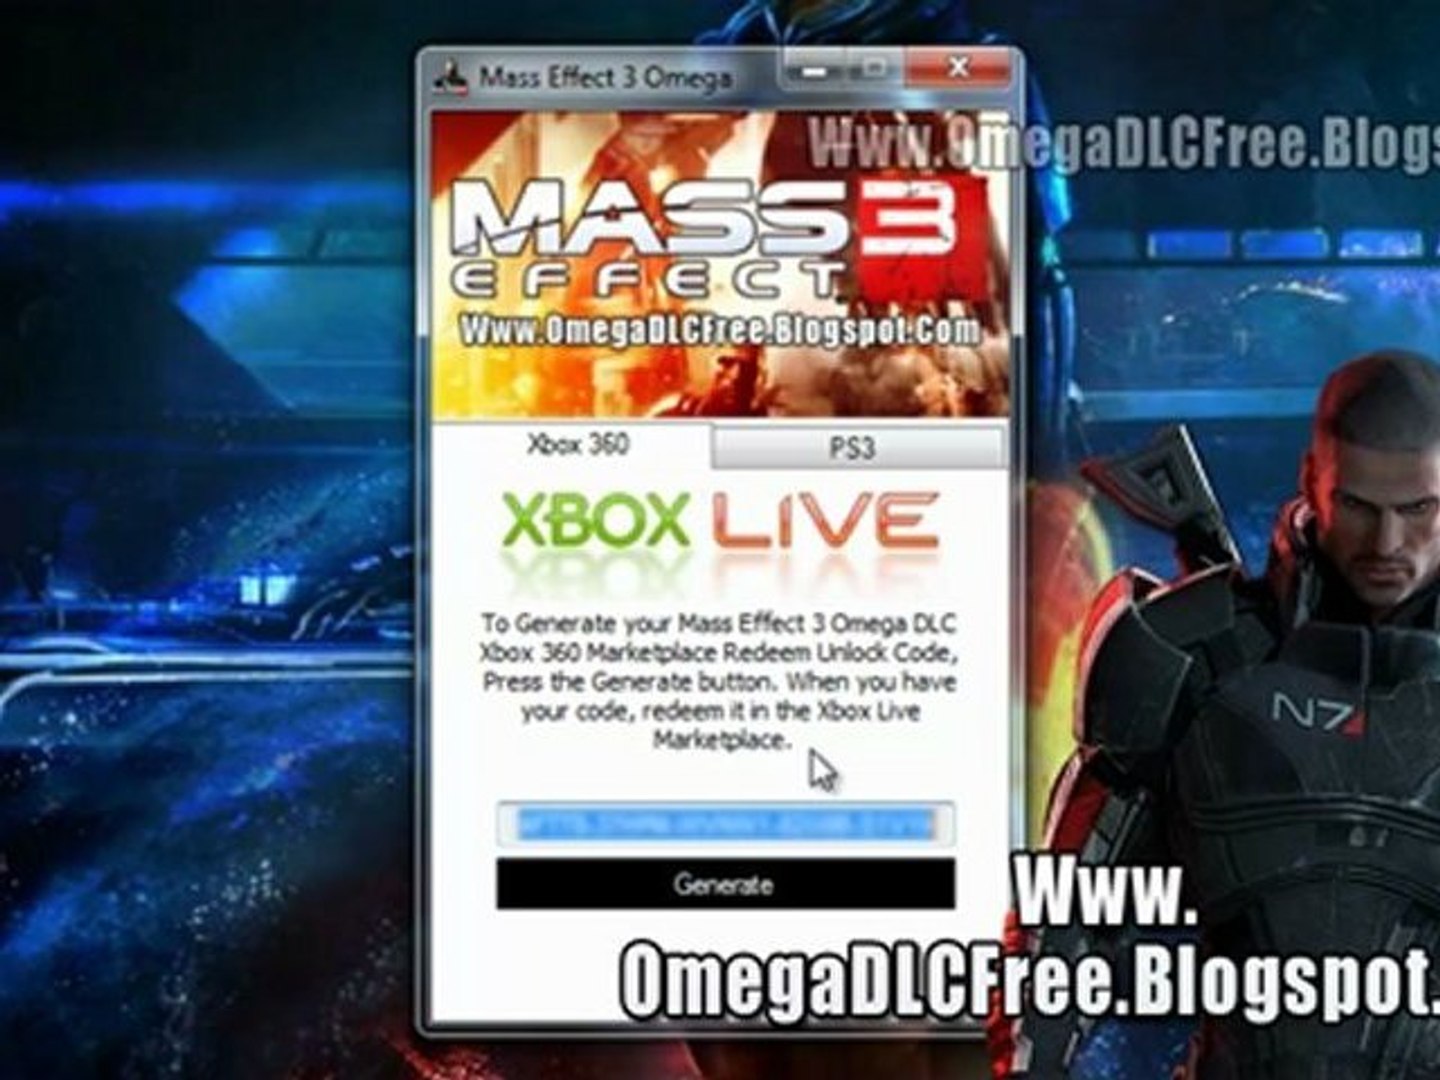 How to Get Mass Effect 3 Omega DLC Free - video Dailymotion